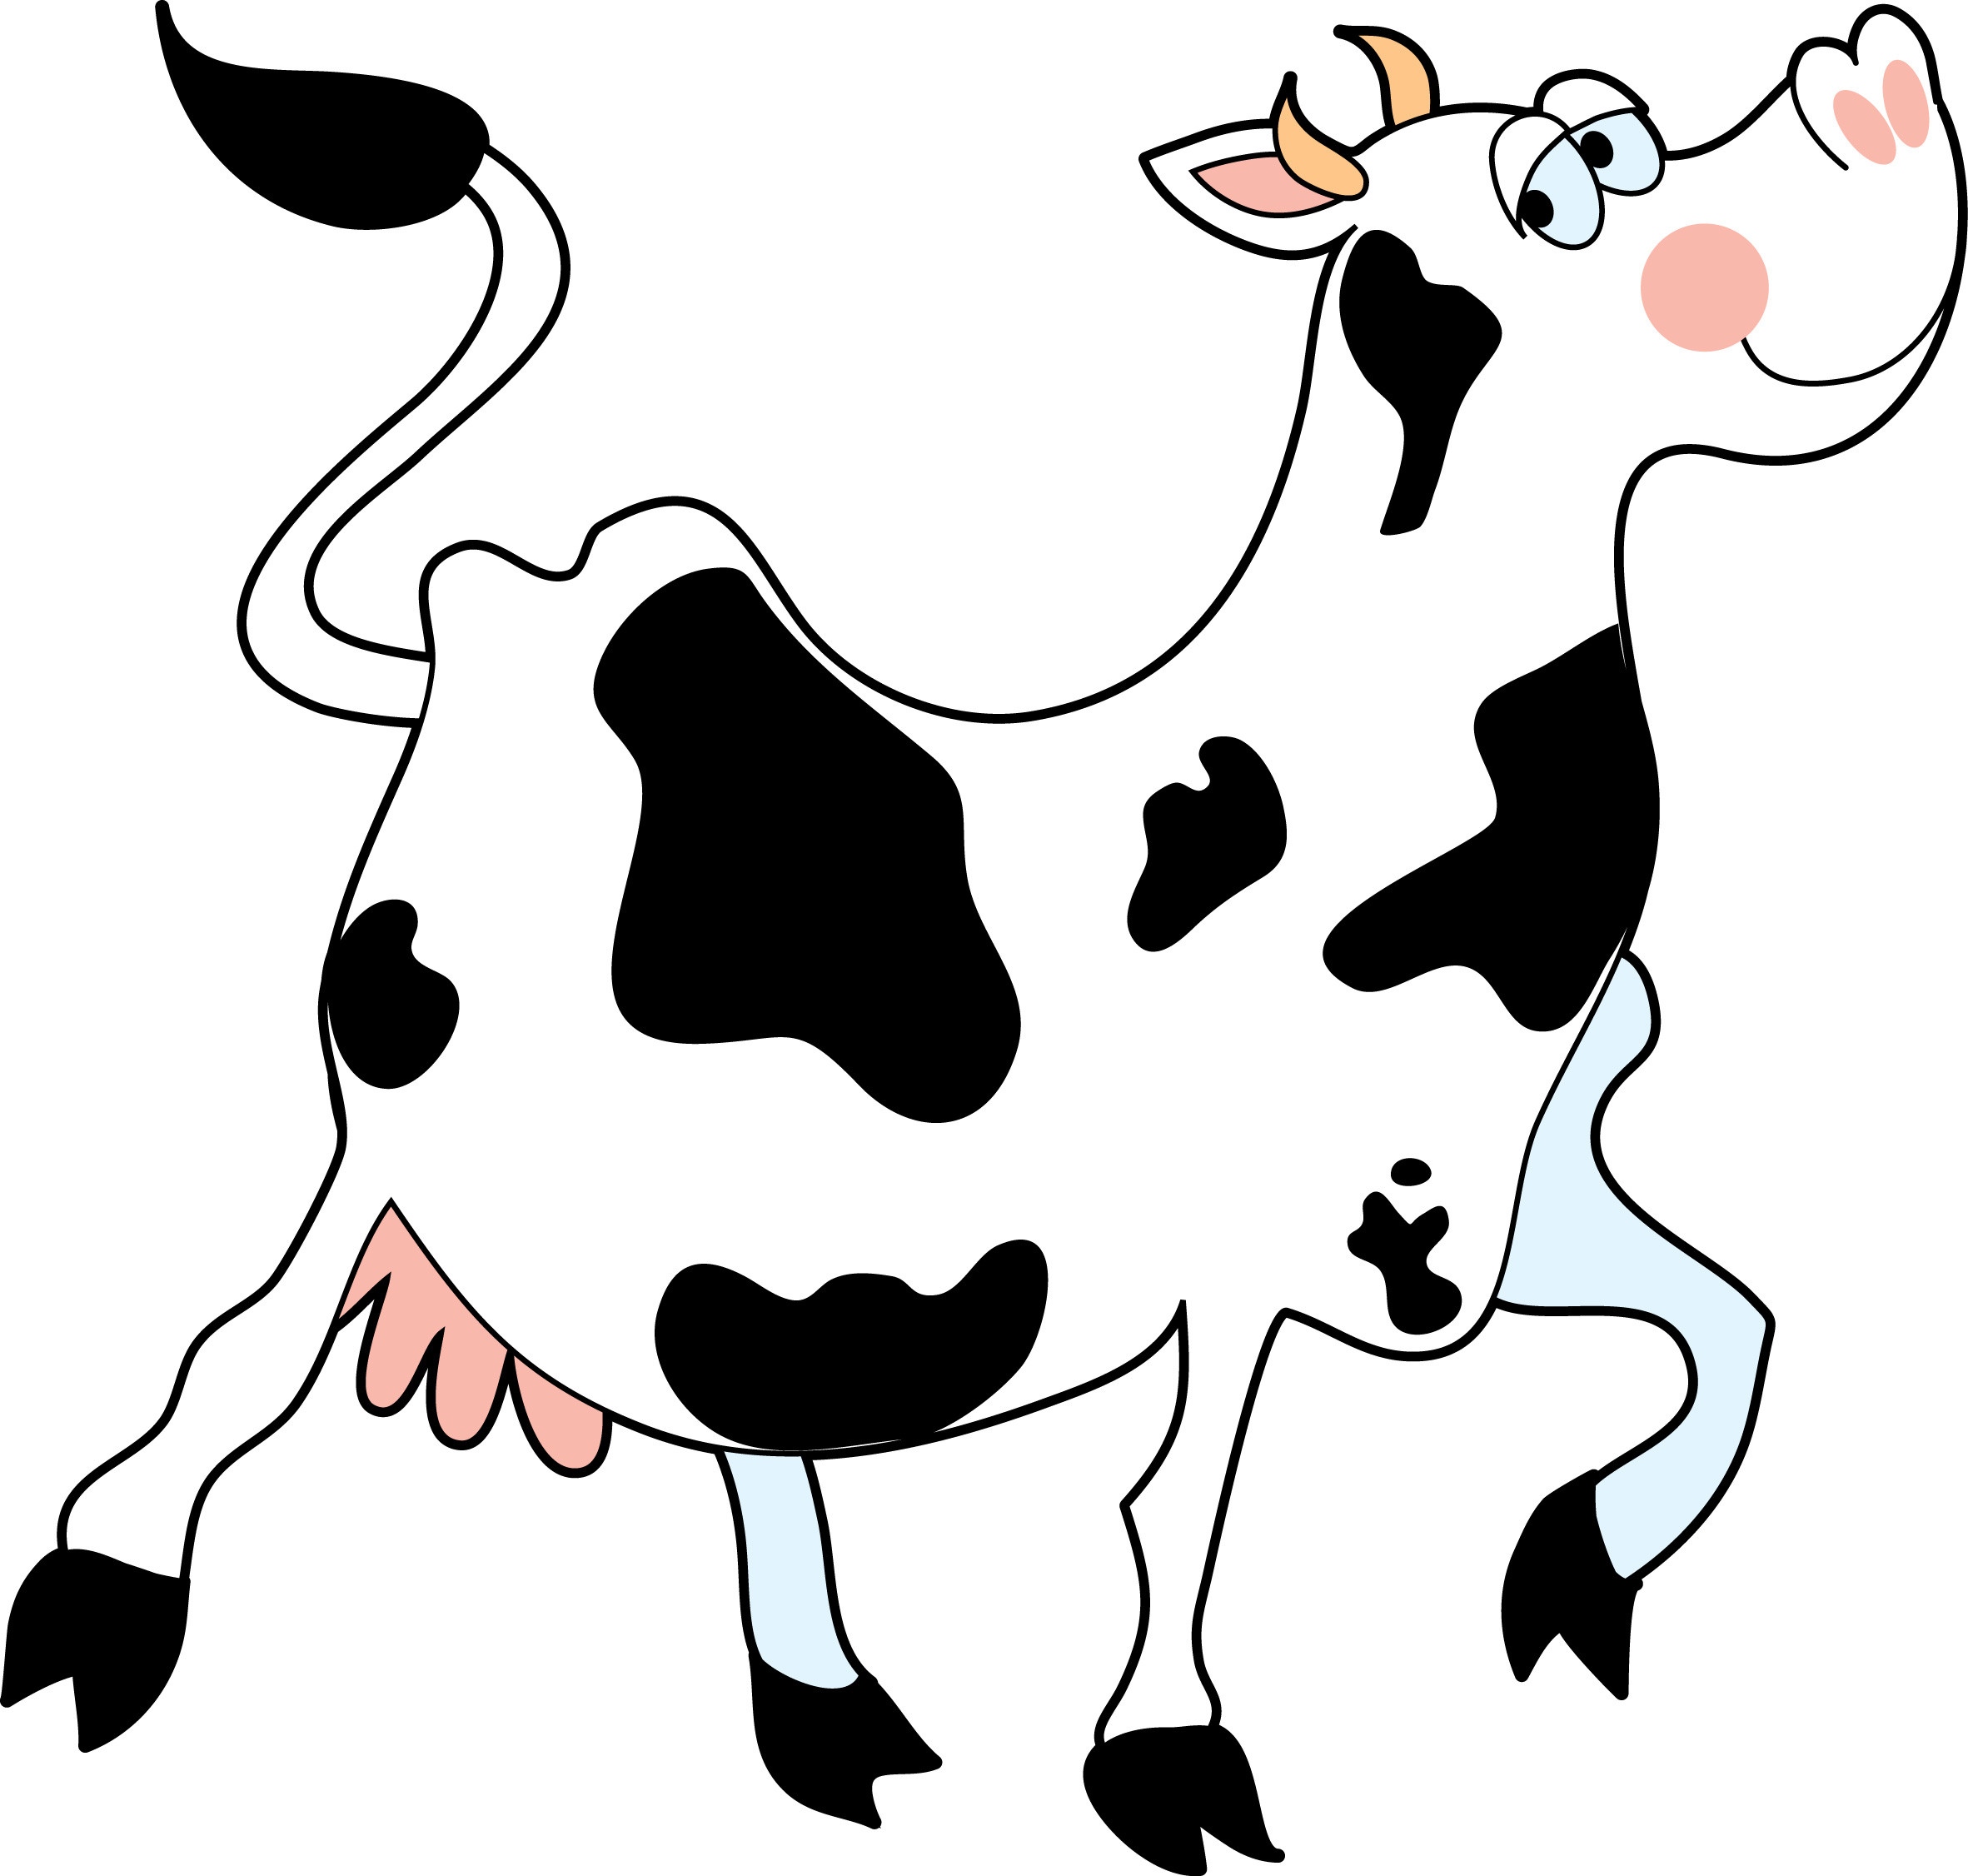 Free Animated Cow Pictures, Download Free Clip Art, Free